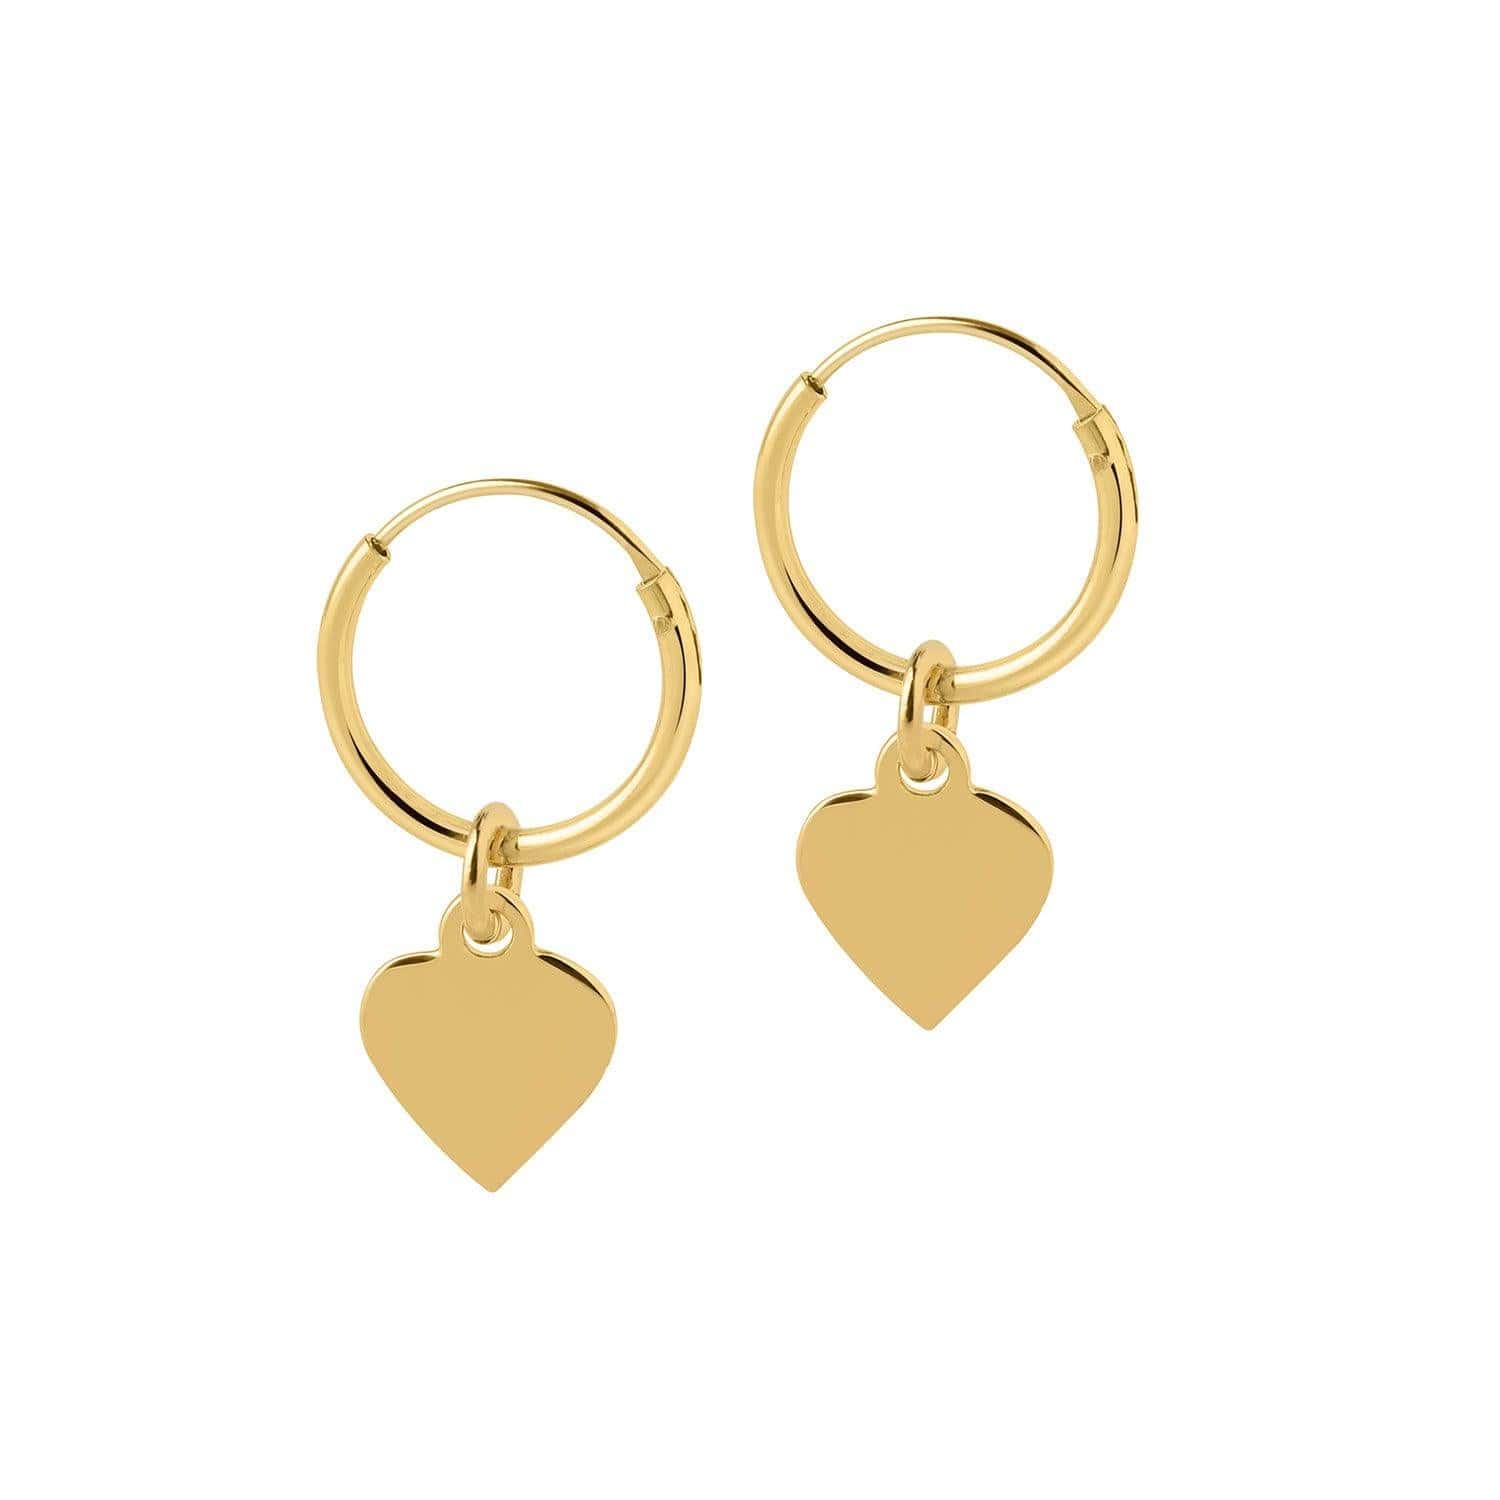 Hoop Earrings with Pendant Heart Gold Plated 12 MM